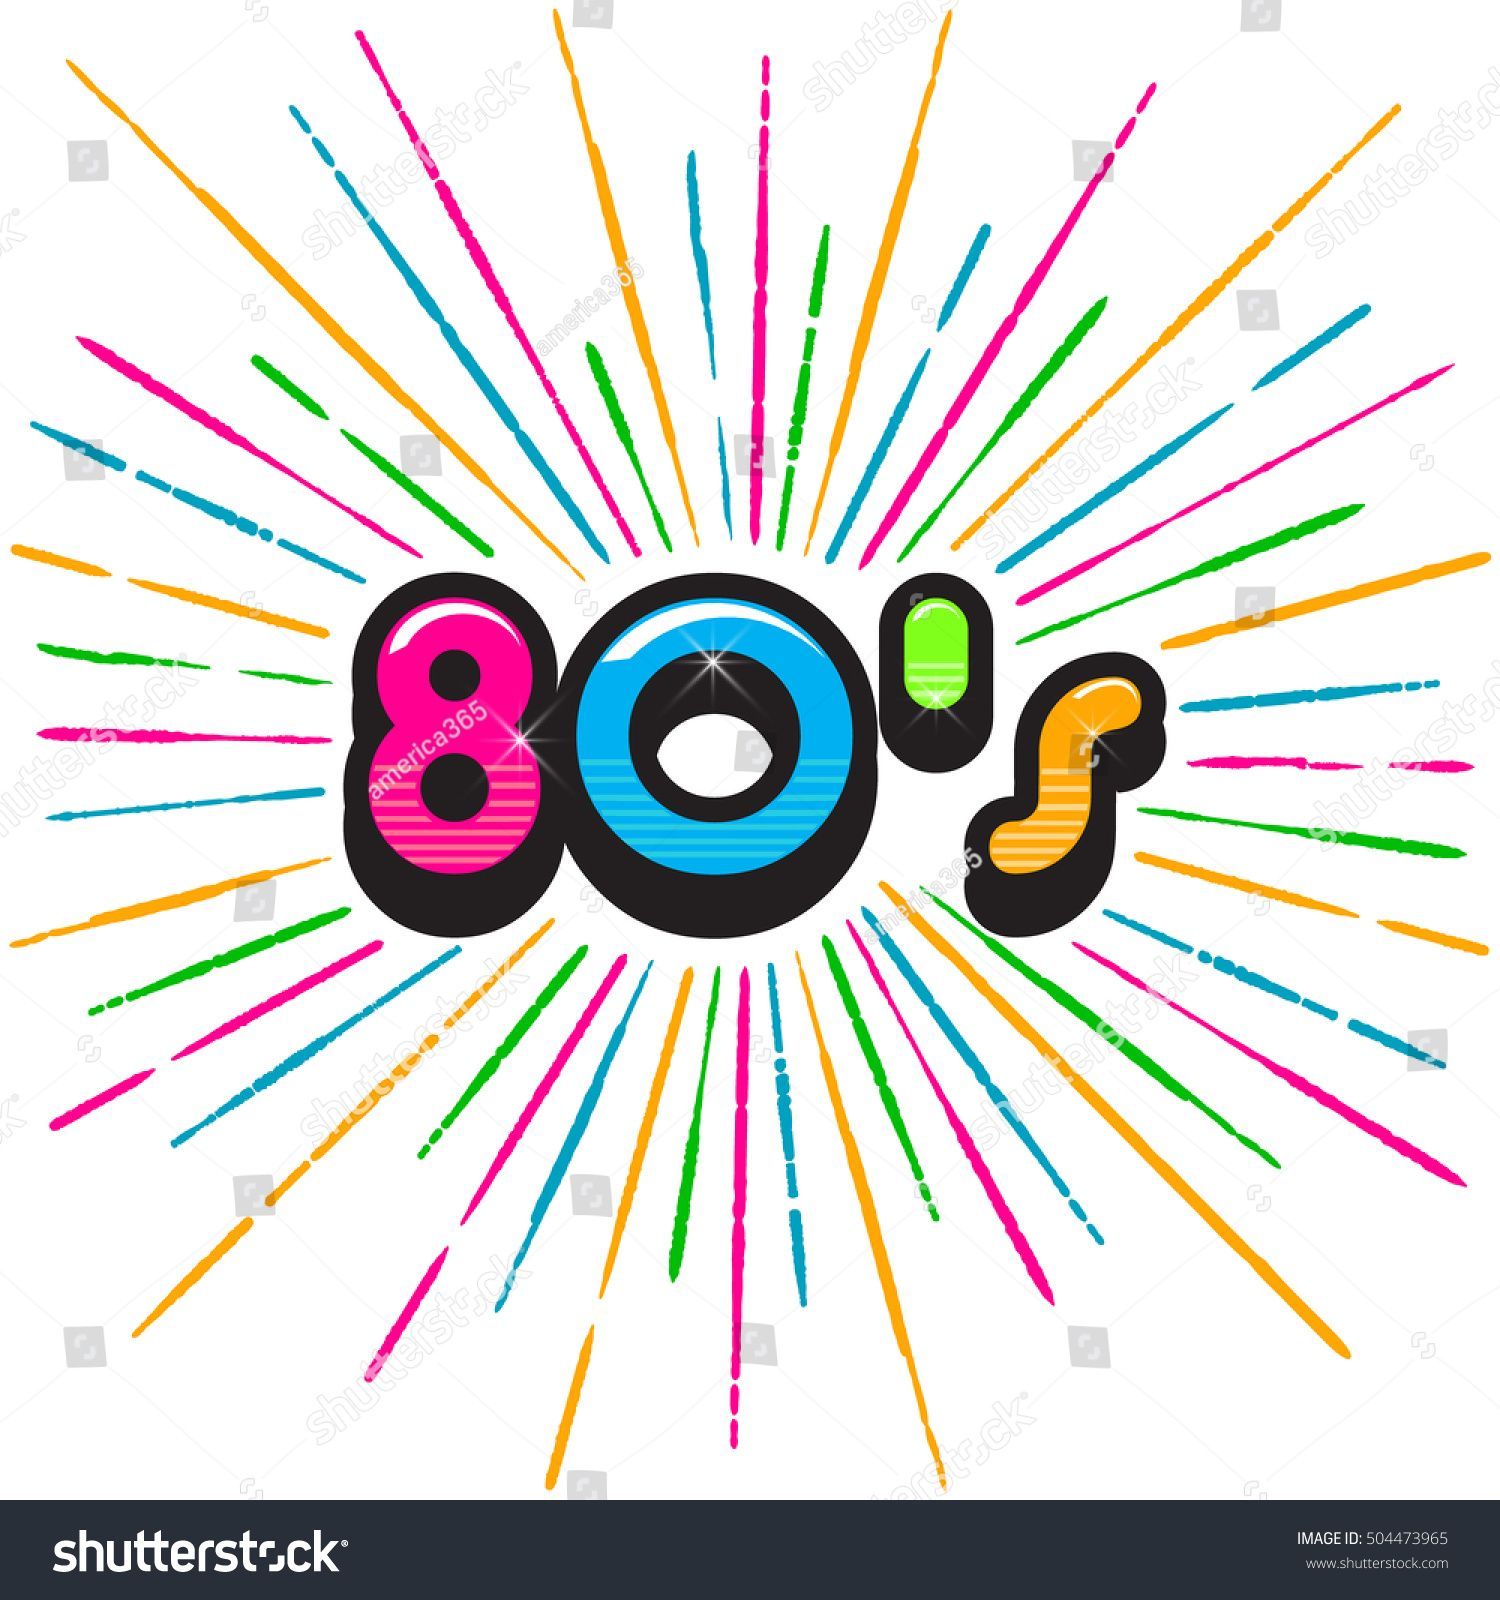 80's clipart 80 background